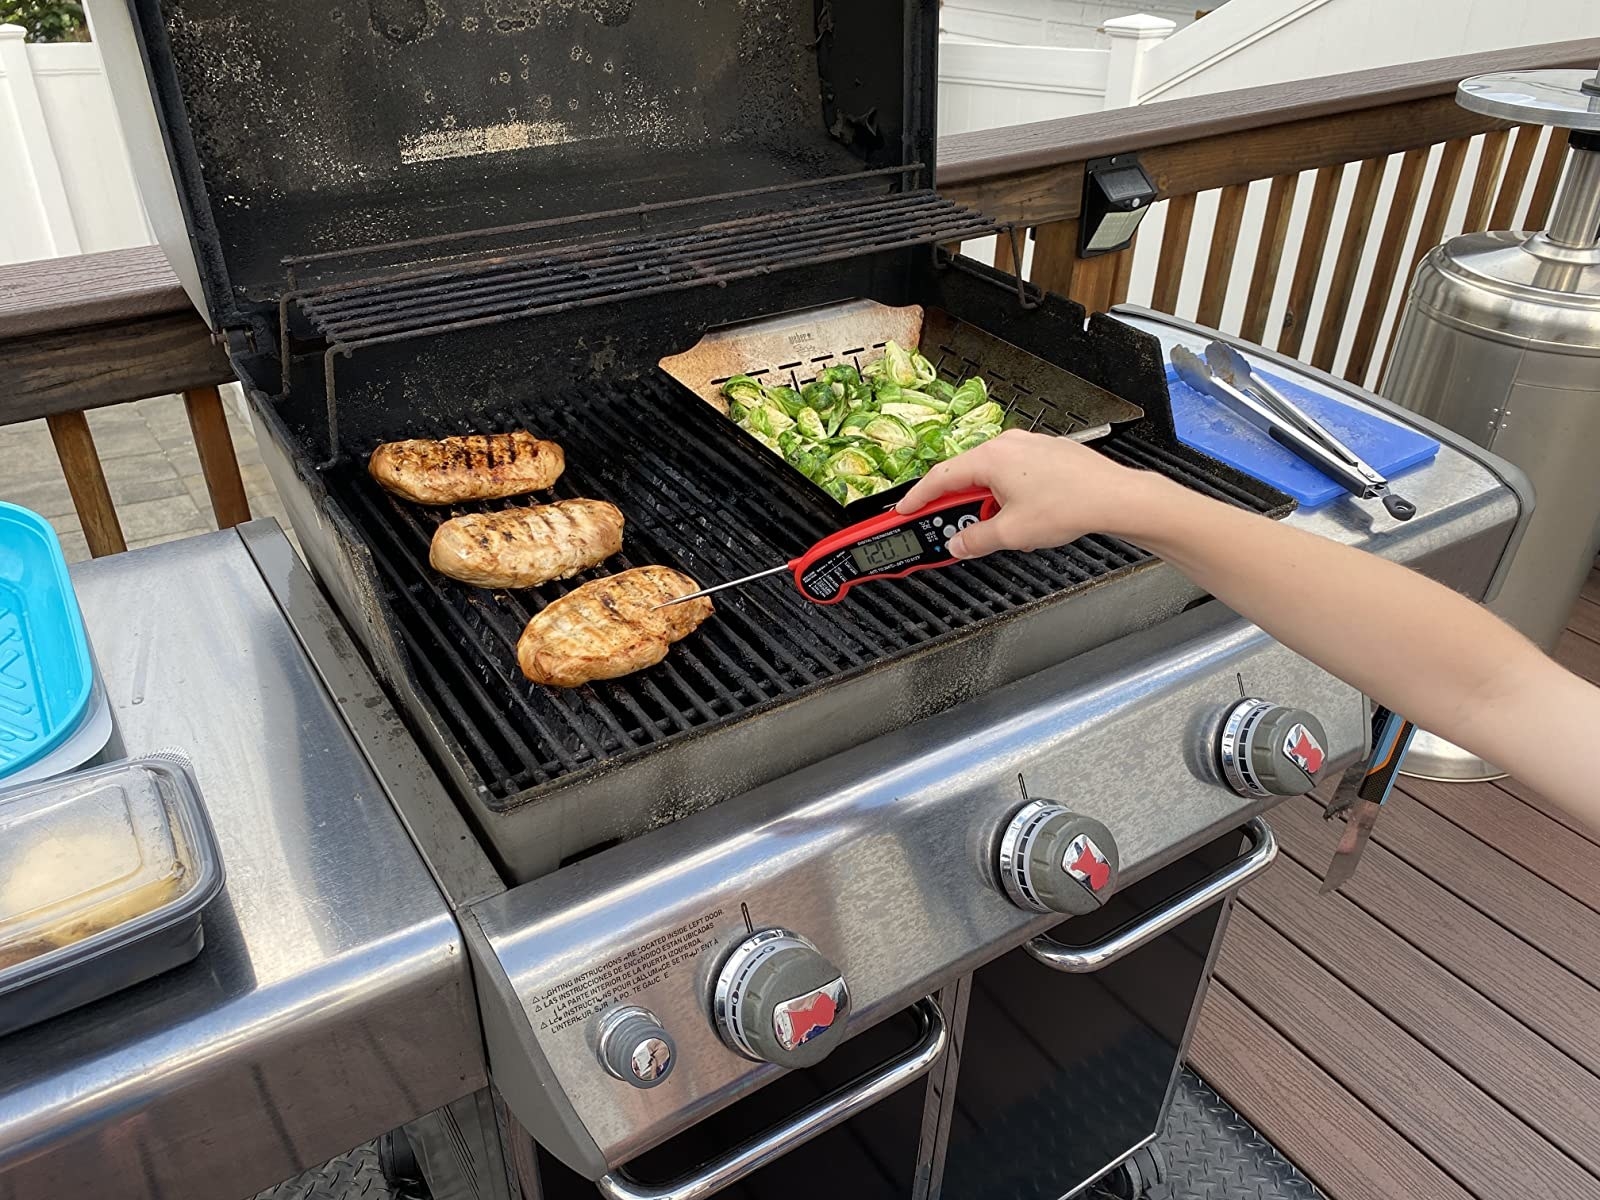 Reviewer using thermometer on chicken on a grill